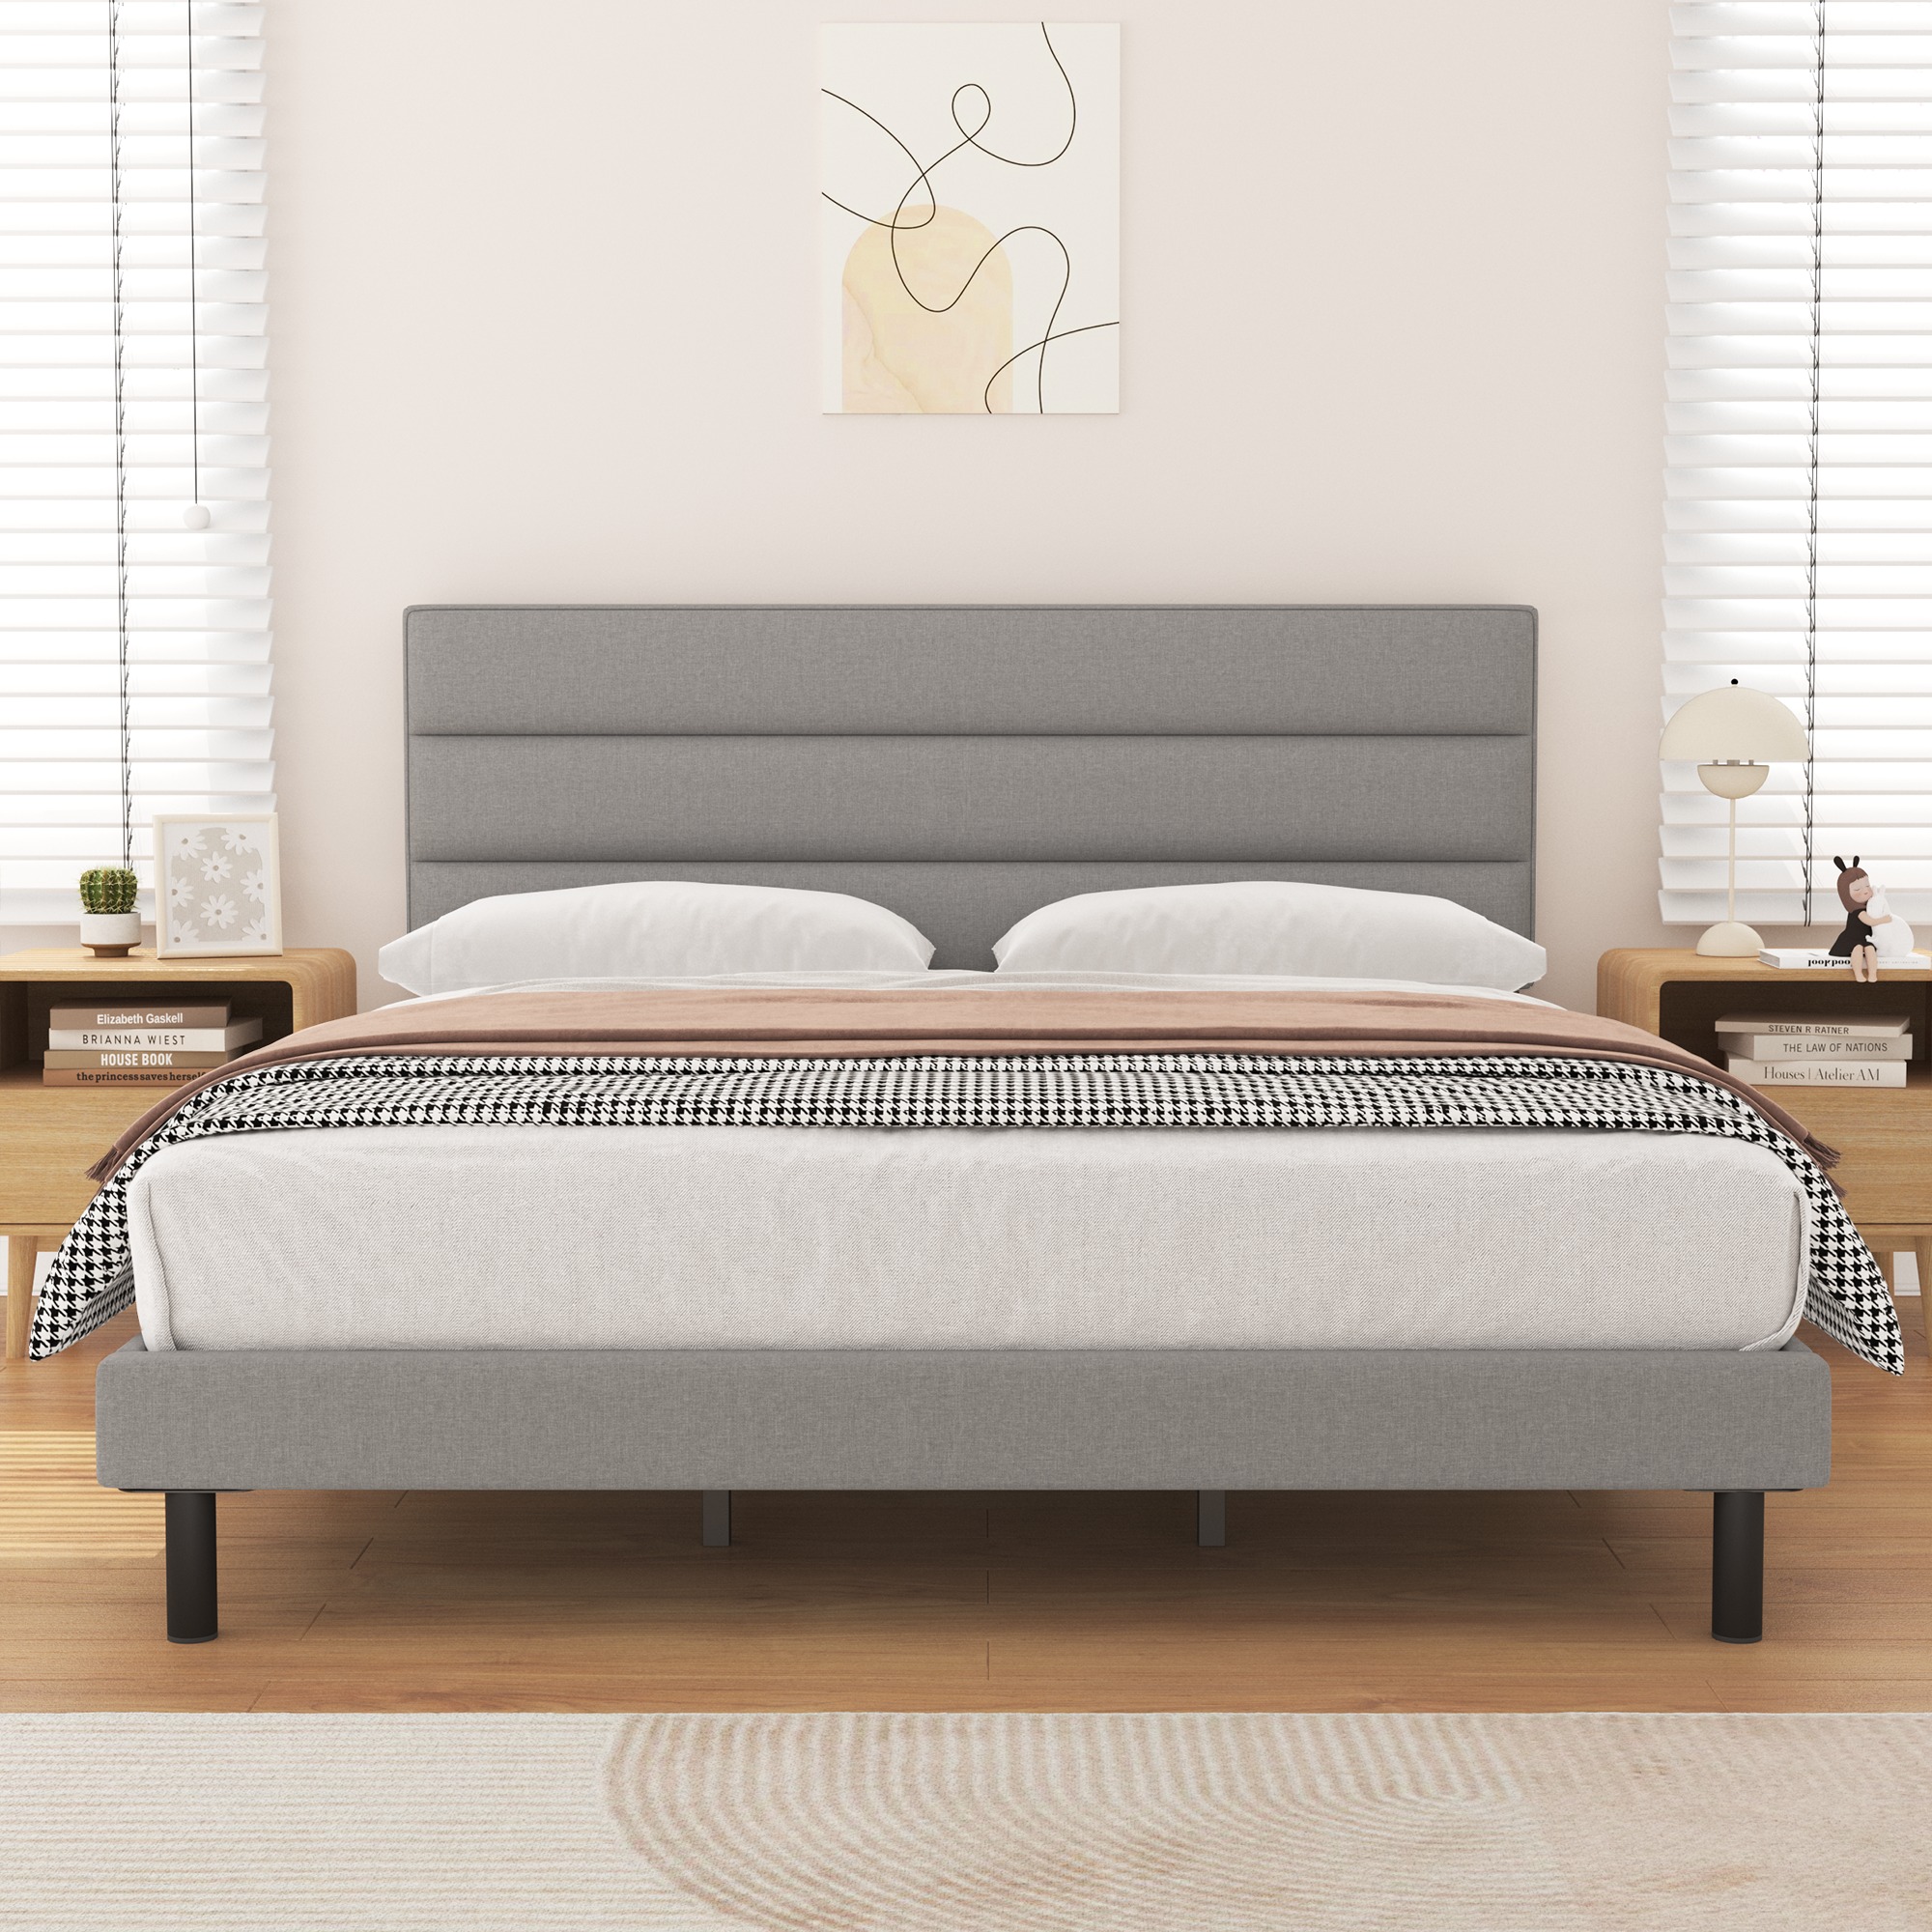 Queen Bed Frame, HAIIDE Queen Size Platform Bed with Wingback Fabric Upholstered Headboard, Light Gray - image 1 of 8